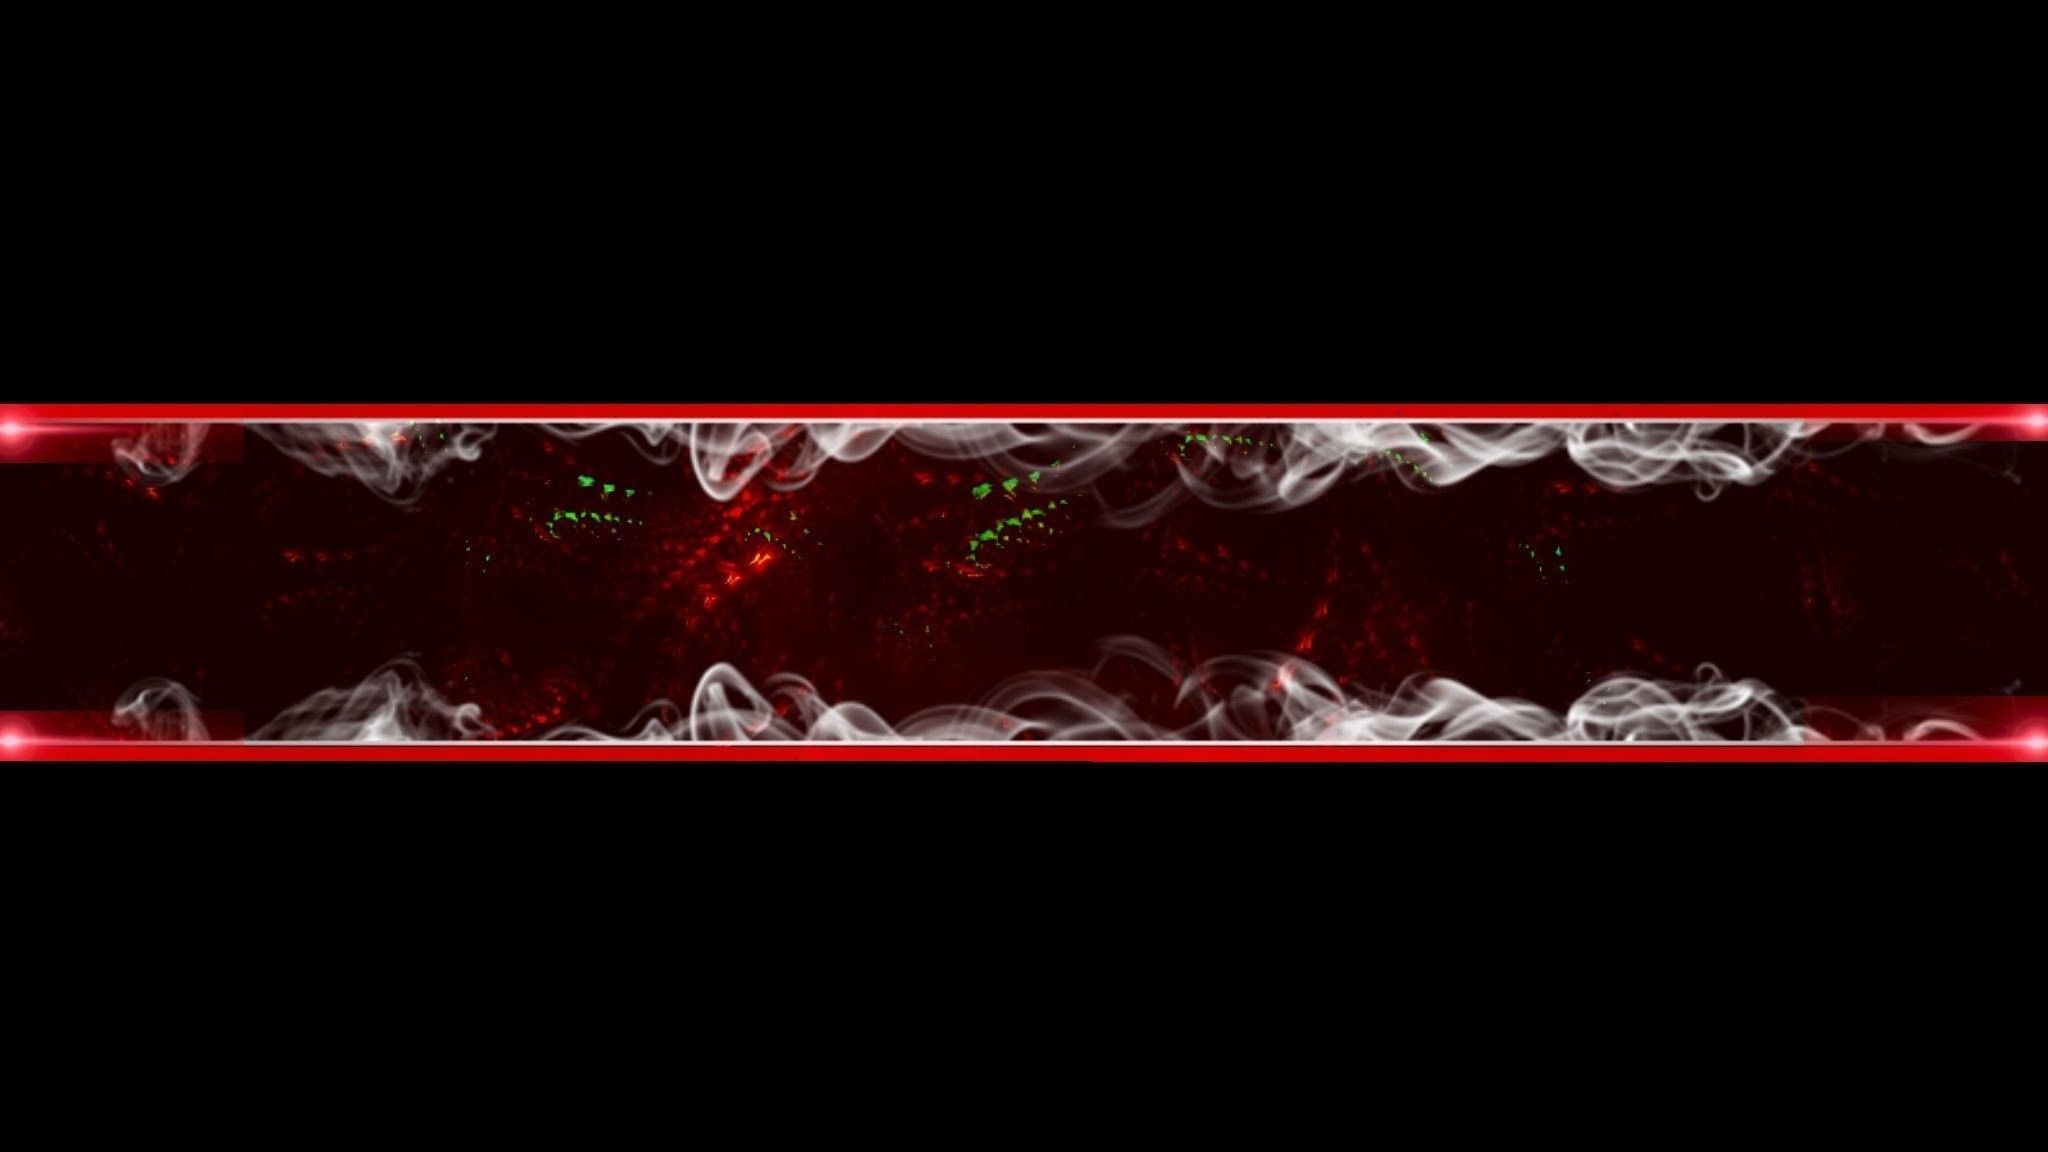 2048x1152 Res 2048x1152 Youtube Banner 2048x1152 Best Business Template In Banner 2048x1152 Youtu Youtube Banner Background Youtube Banner Template Youtube Banners